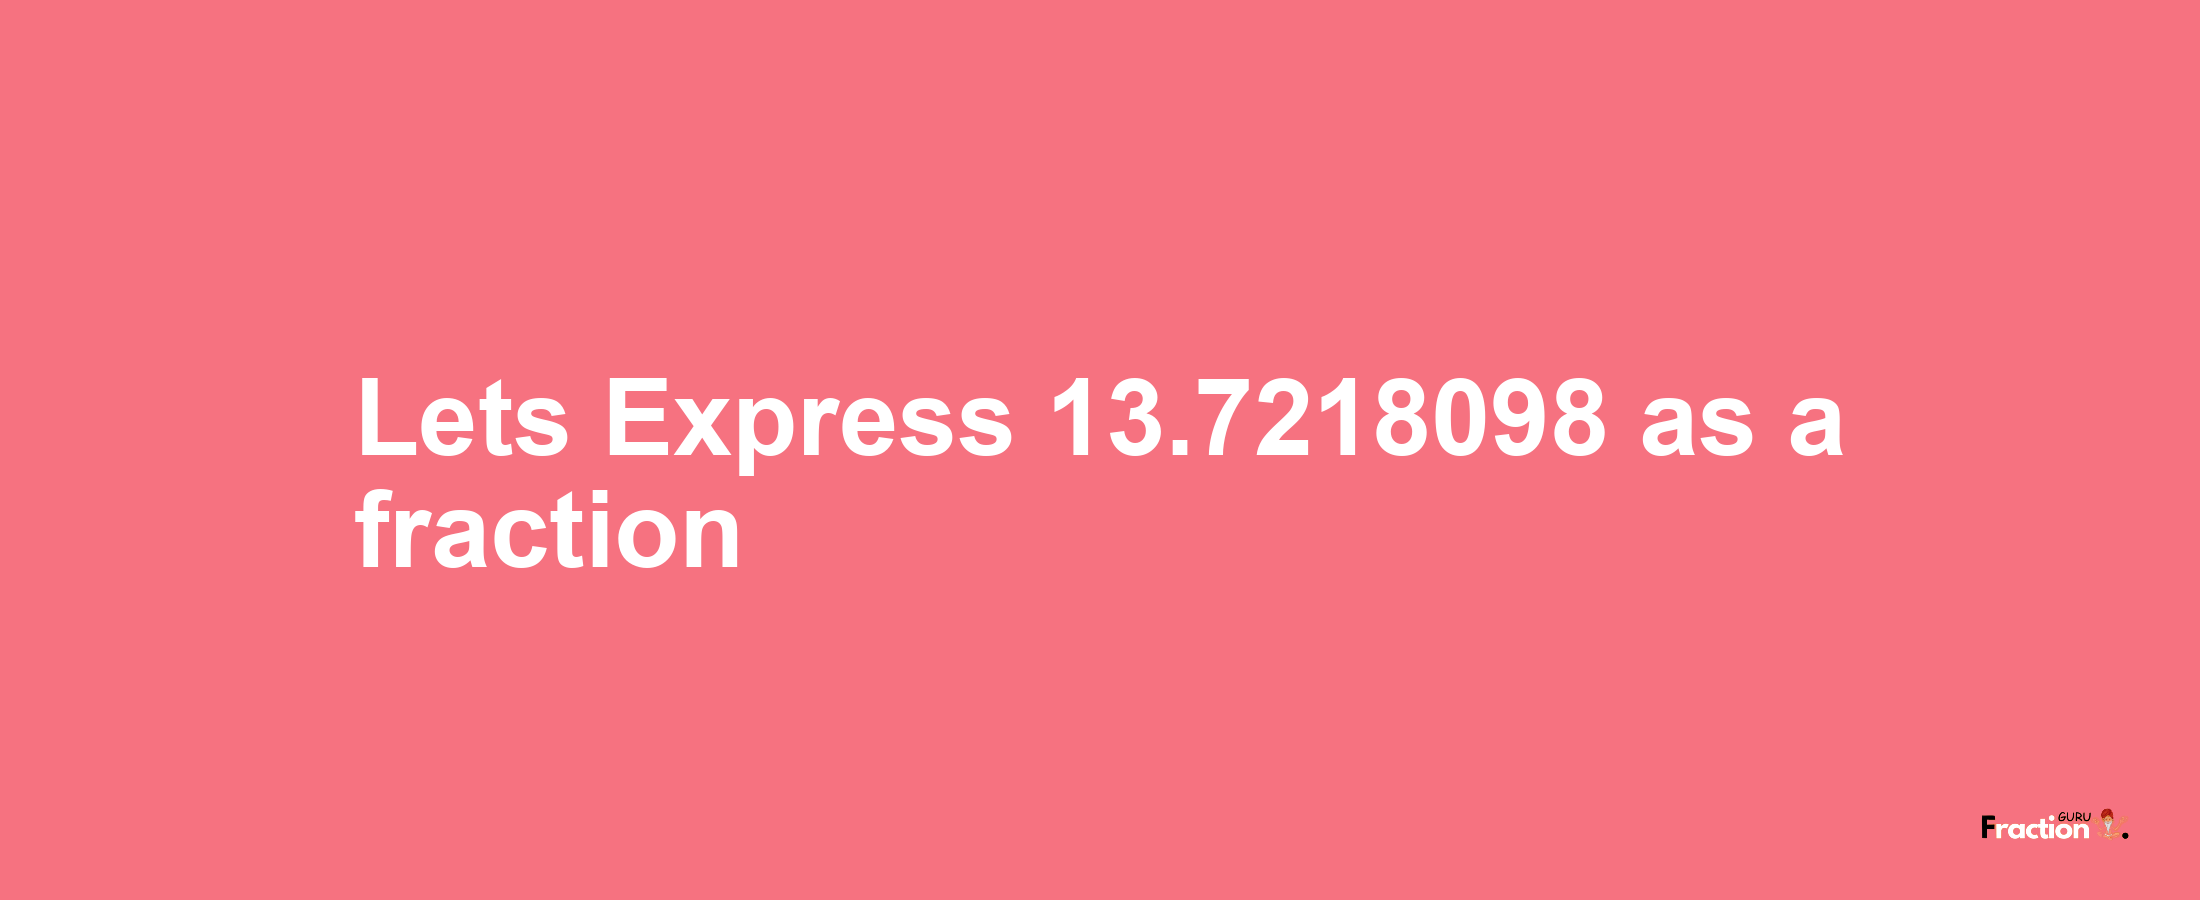 Lets Express 13.7218098 as afraction